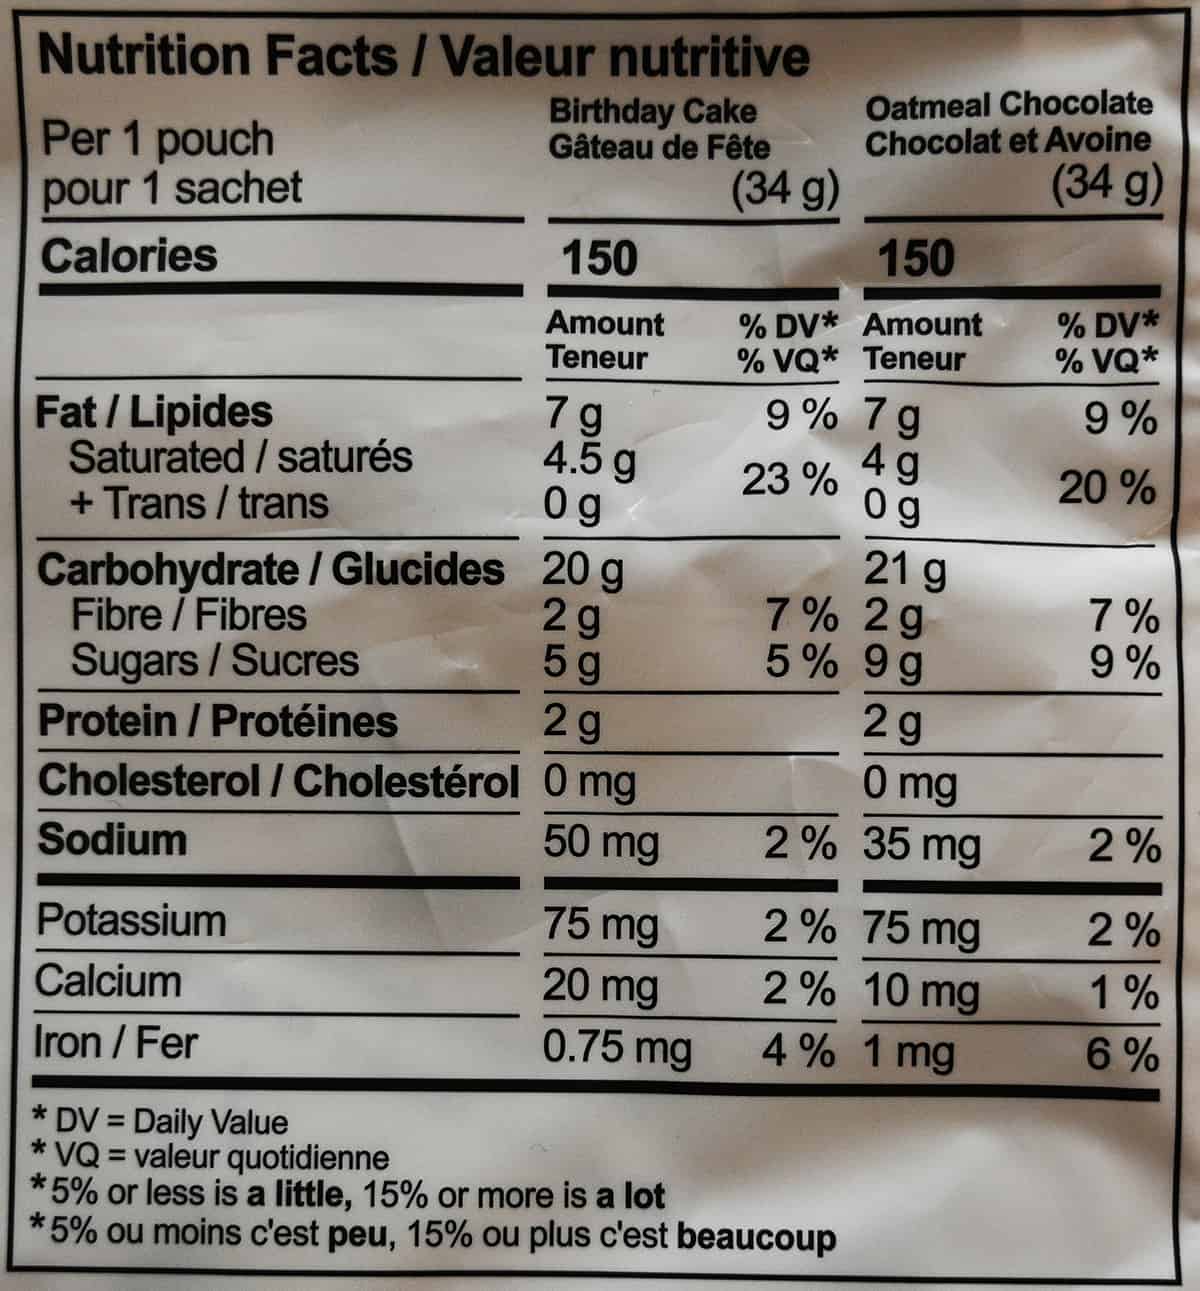 Image of the nutrition facts from the back of the back.